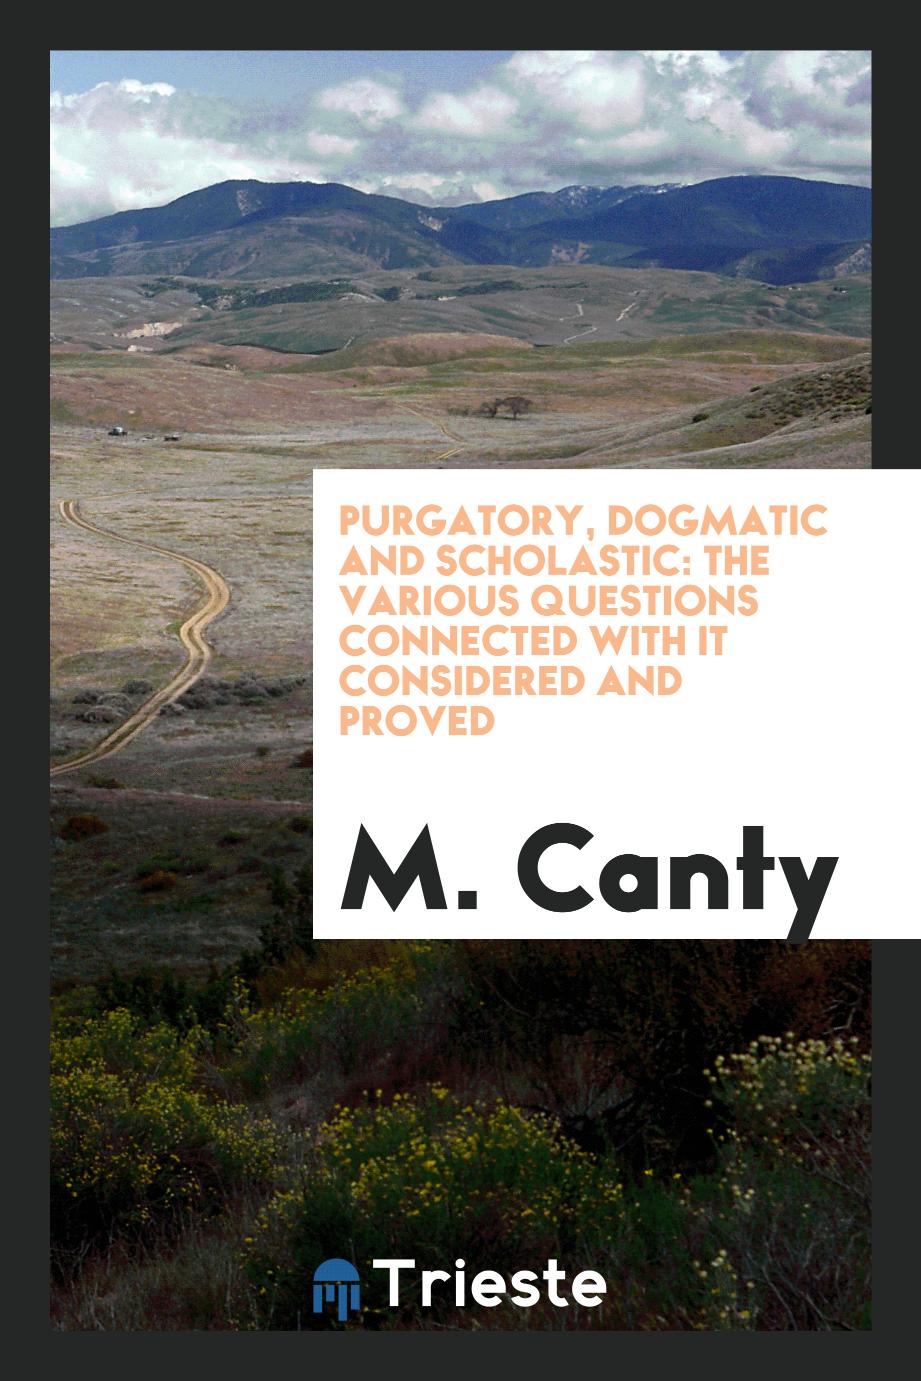 Purgatory, dogmatic and scholastic: the various questions connected with it considered and proved